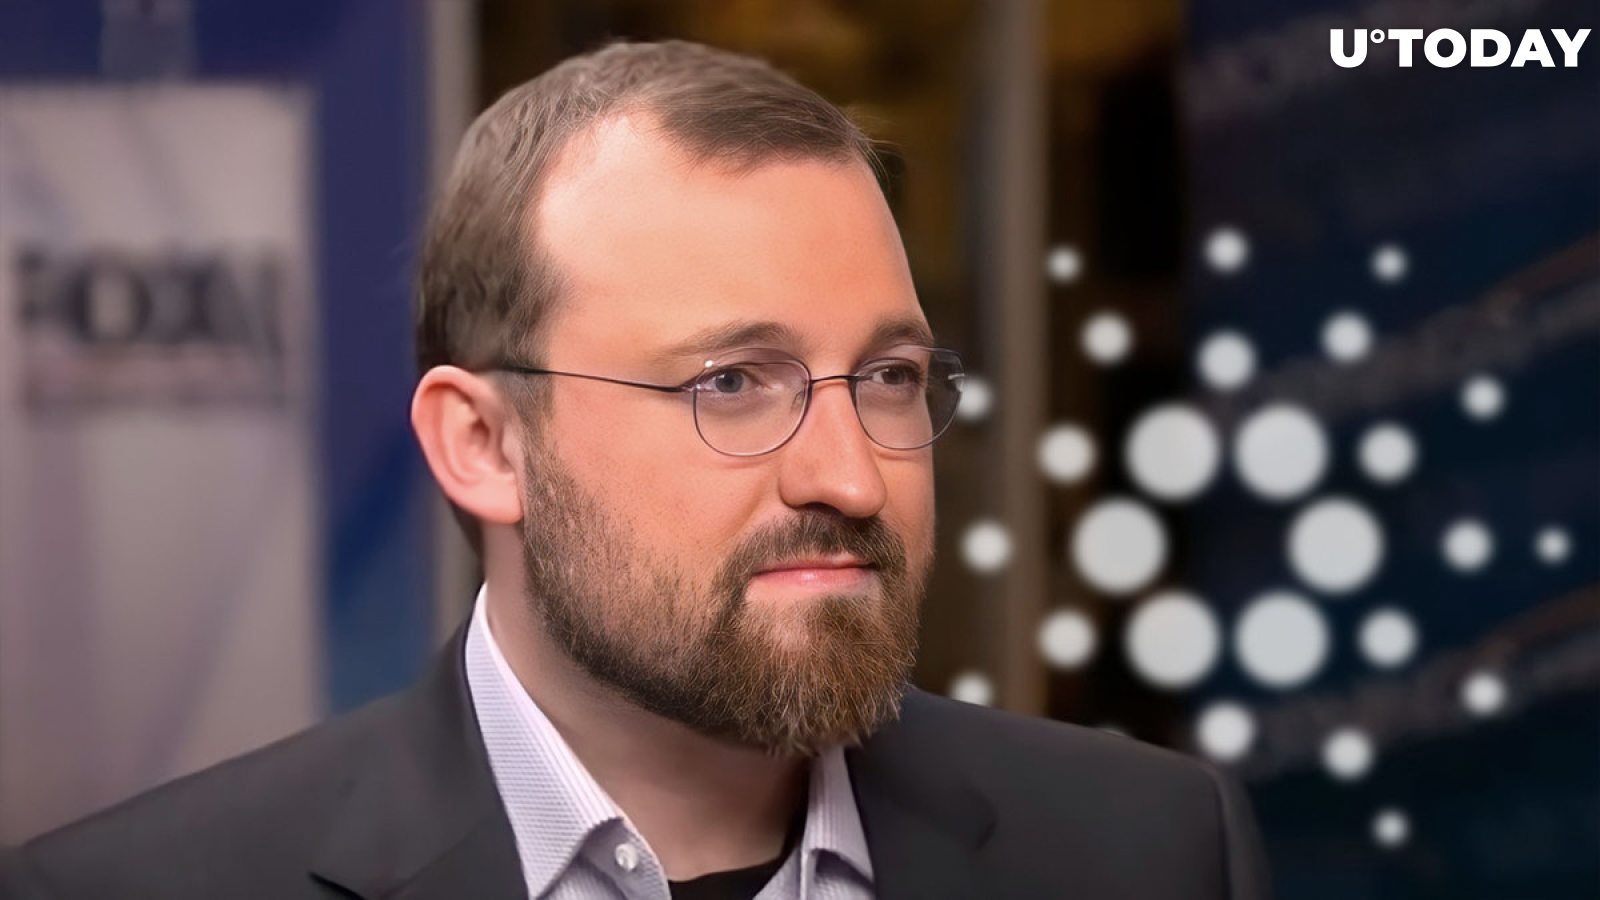 Cardano Will Become World's Biggest Cryptocurrency, Hoskinson Says